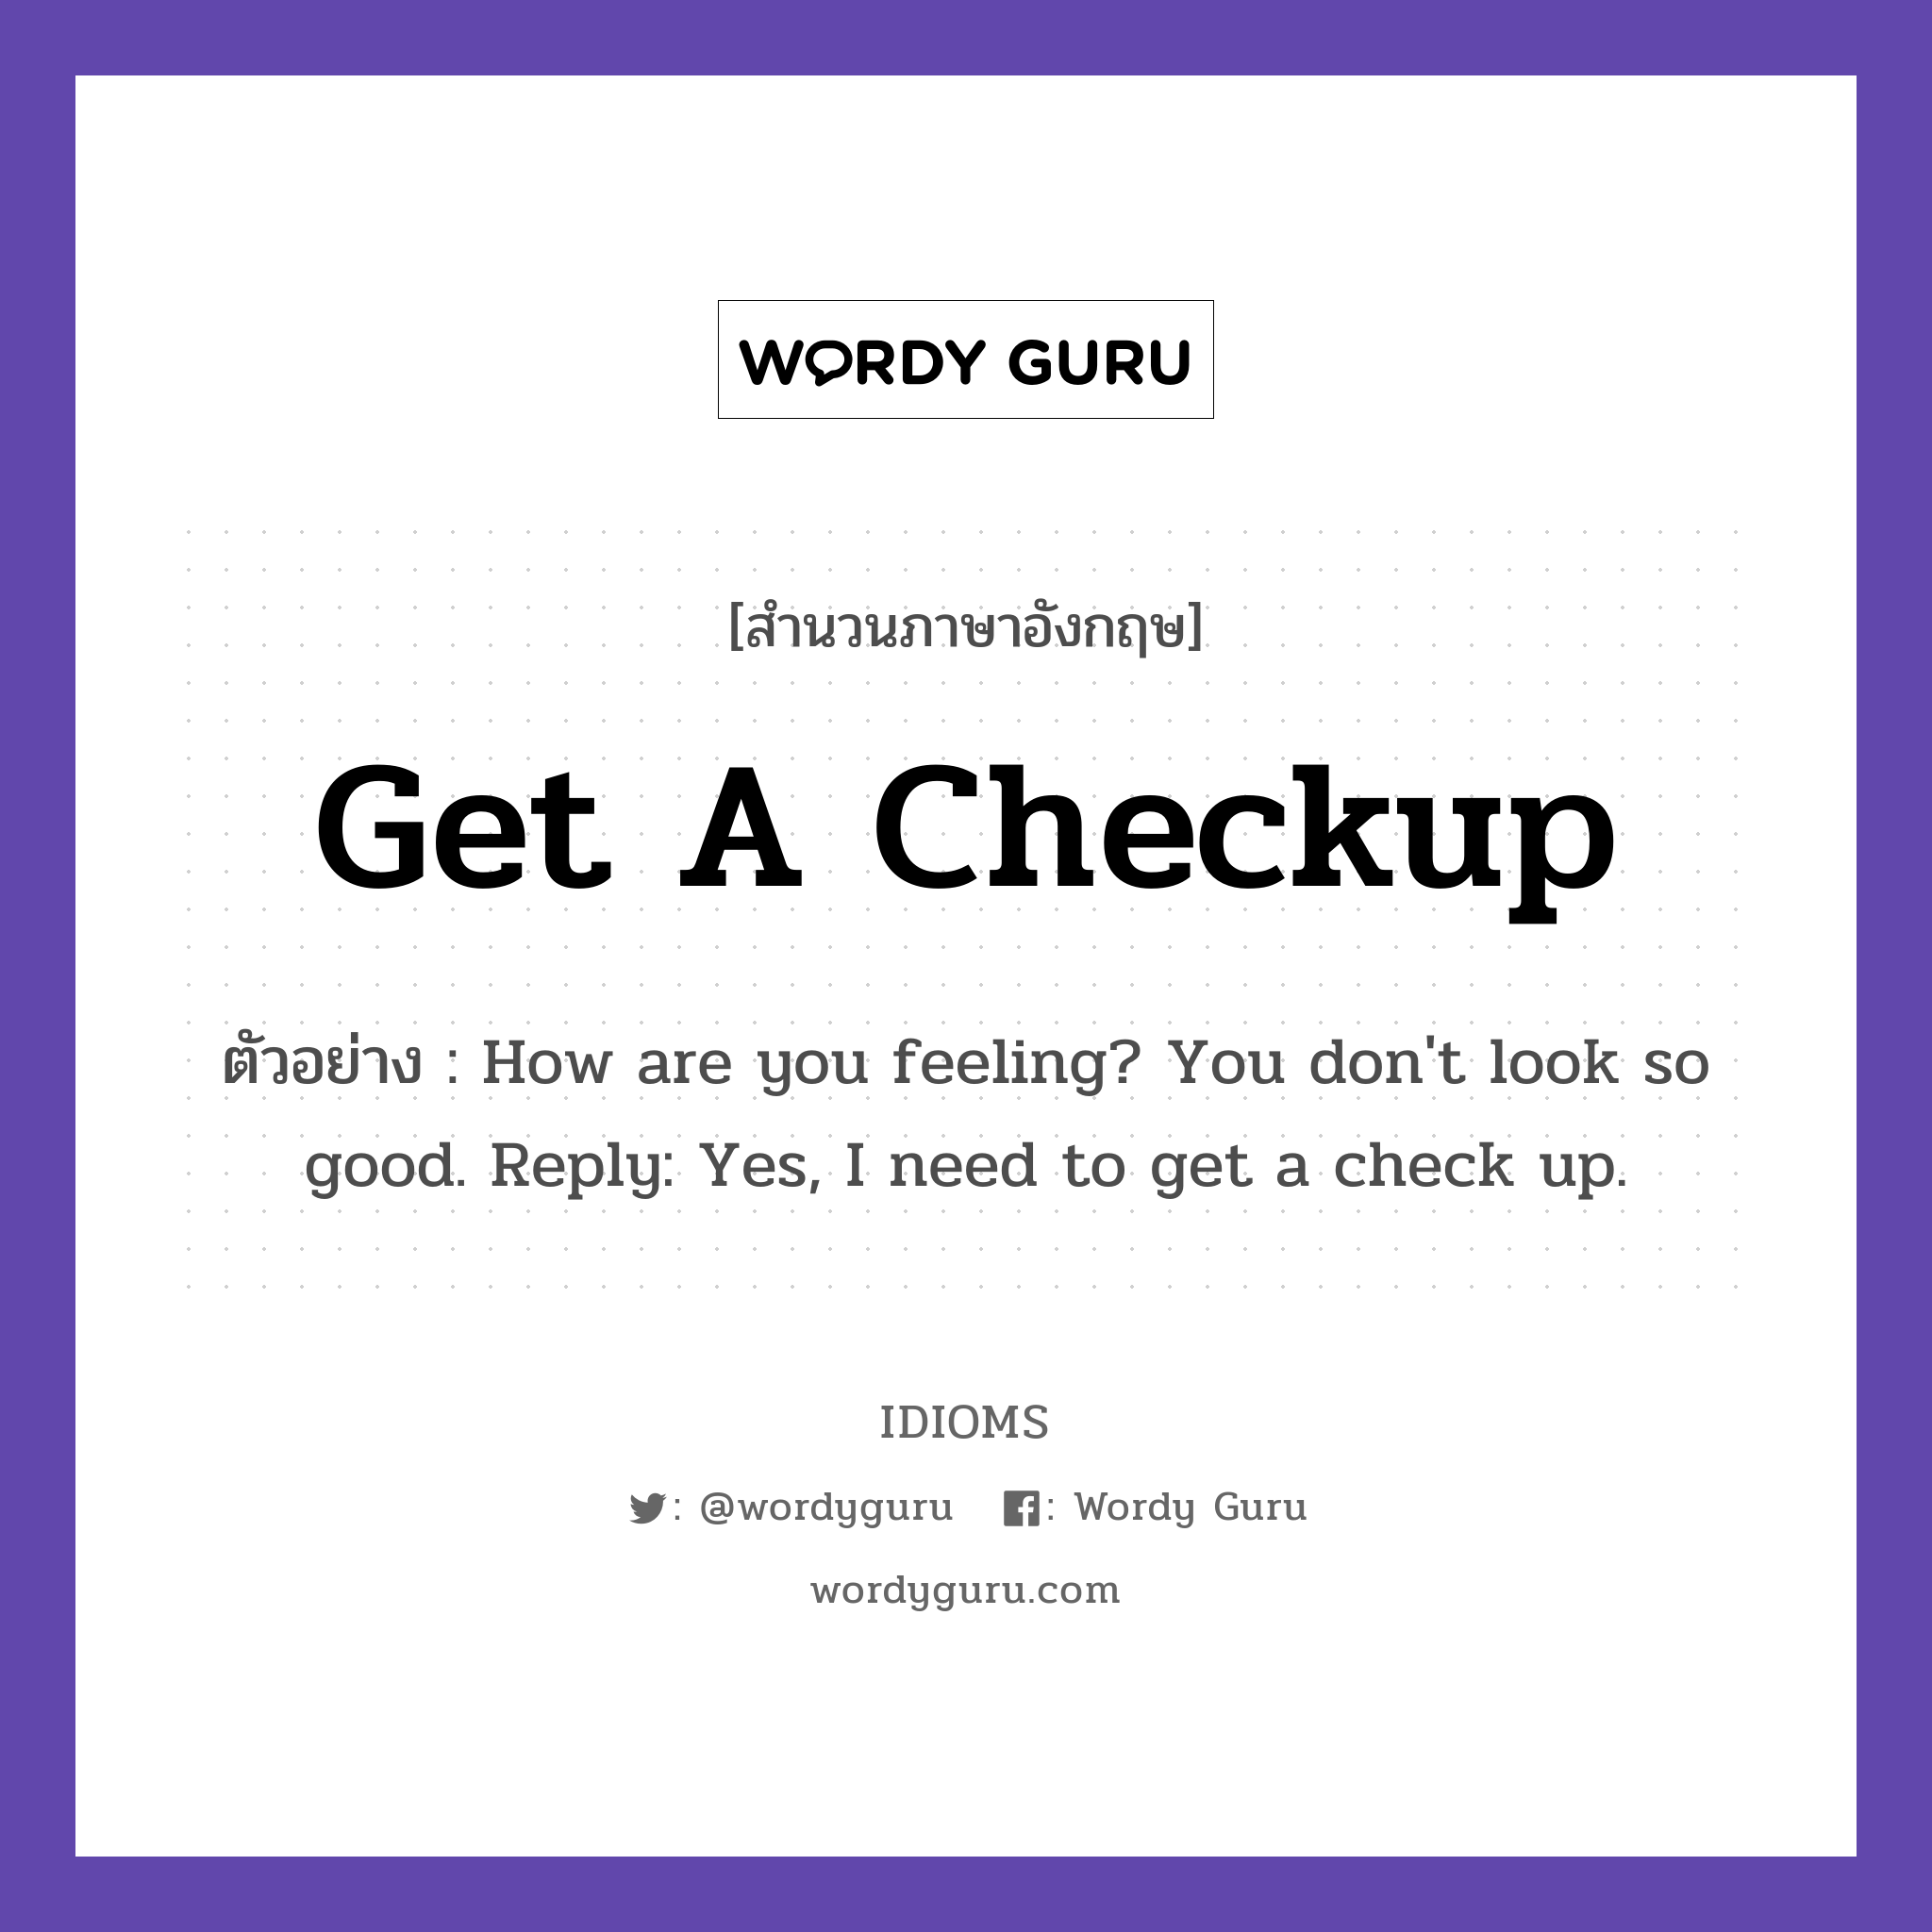 Get A Checkup แปลว่า?, สำนวนภาษาอังกฤษ Get A Checkup ตัวอย่าง How are you feeling? You don't look so good. Reply: Yes, I need to get a check up.